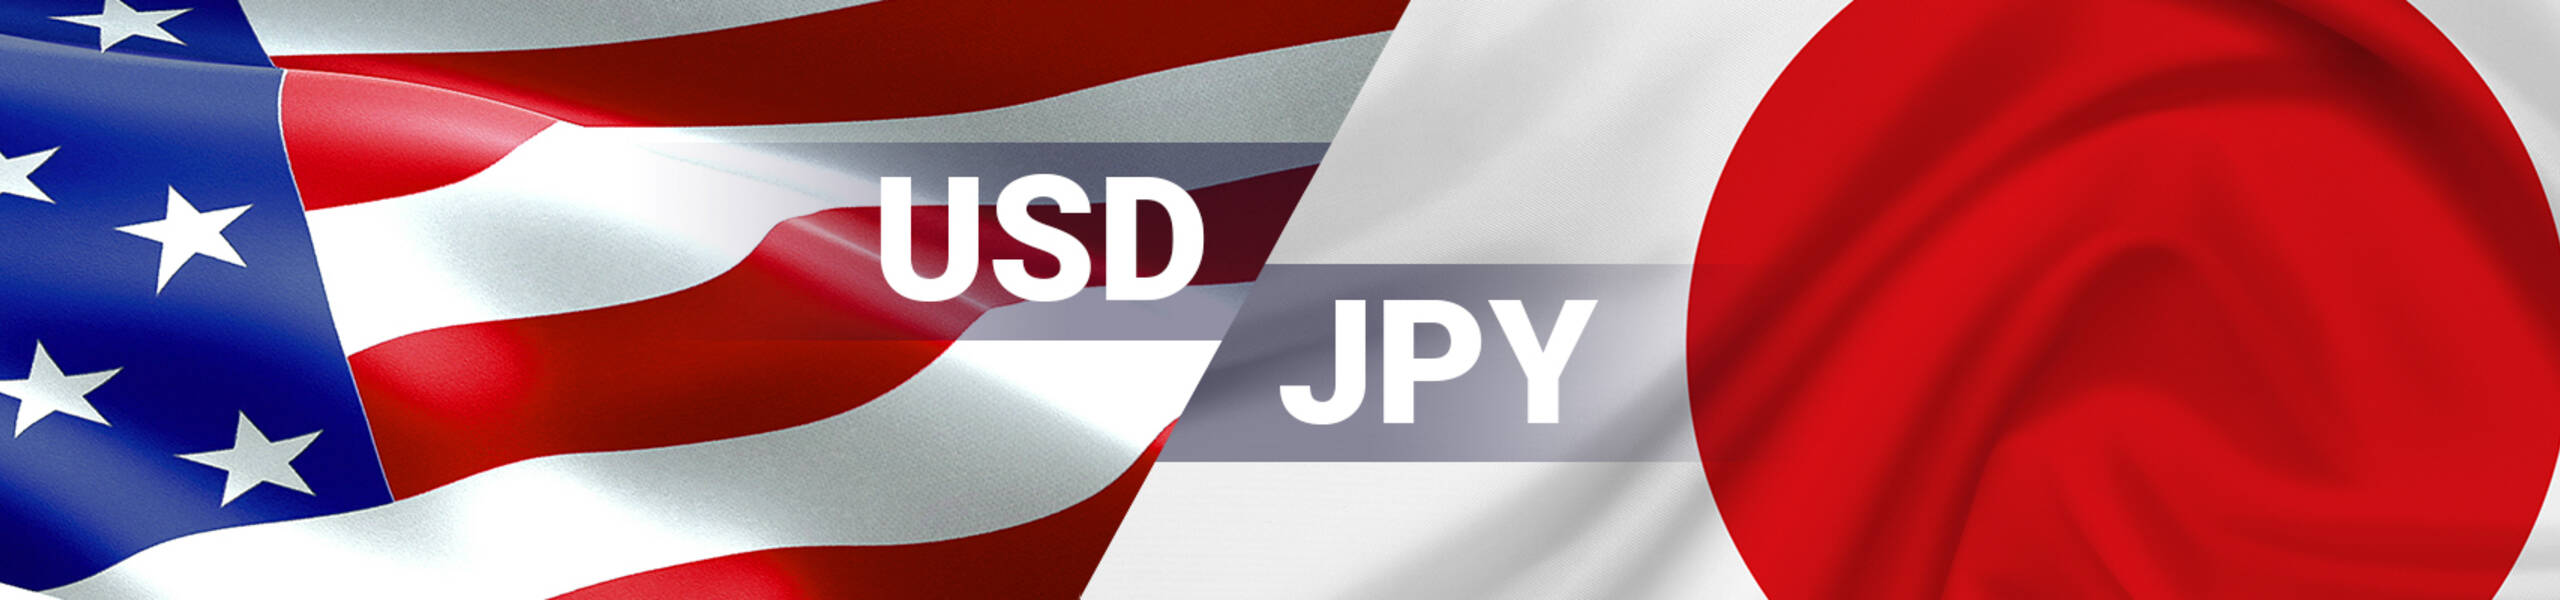 USD/JPY Dailyレポート 2017/06/22